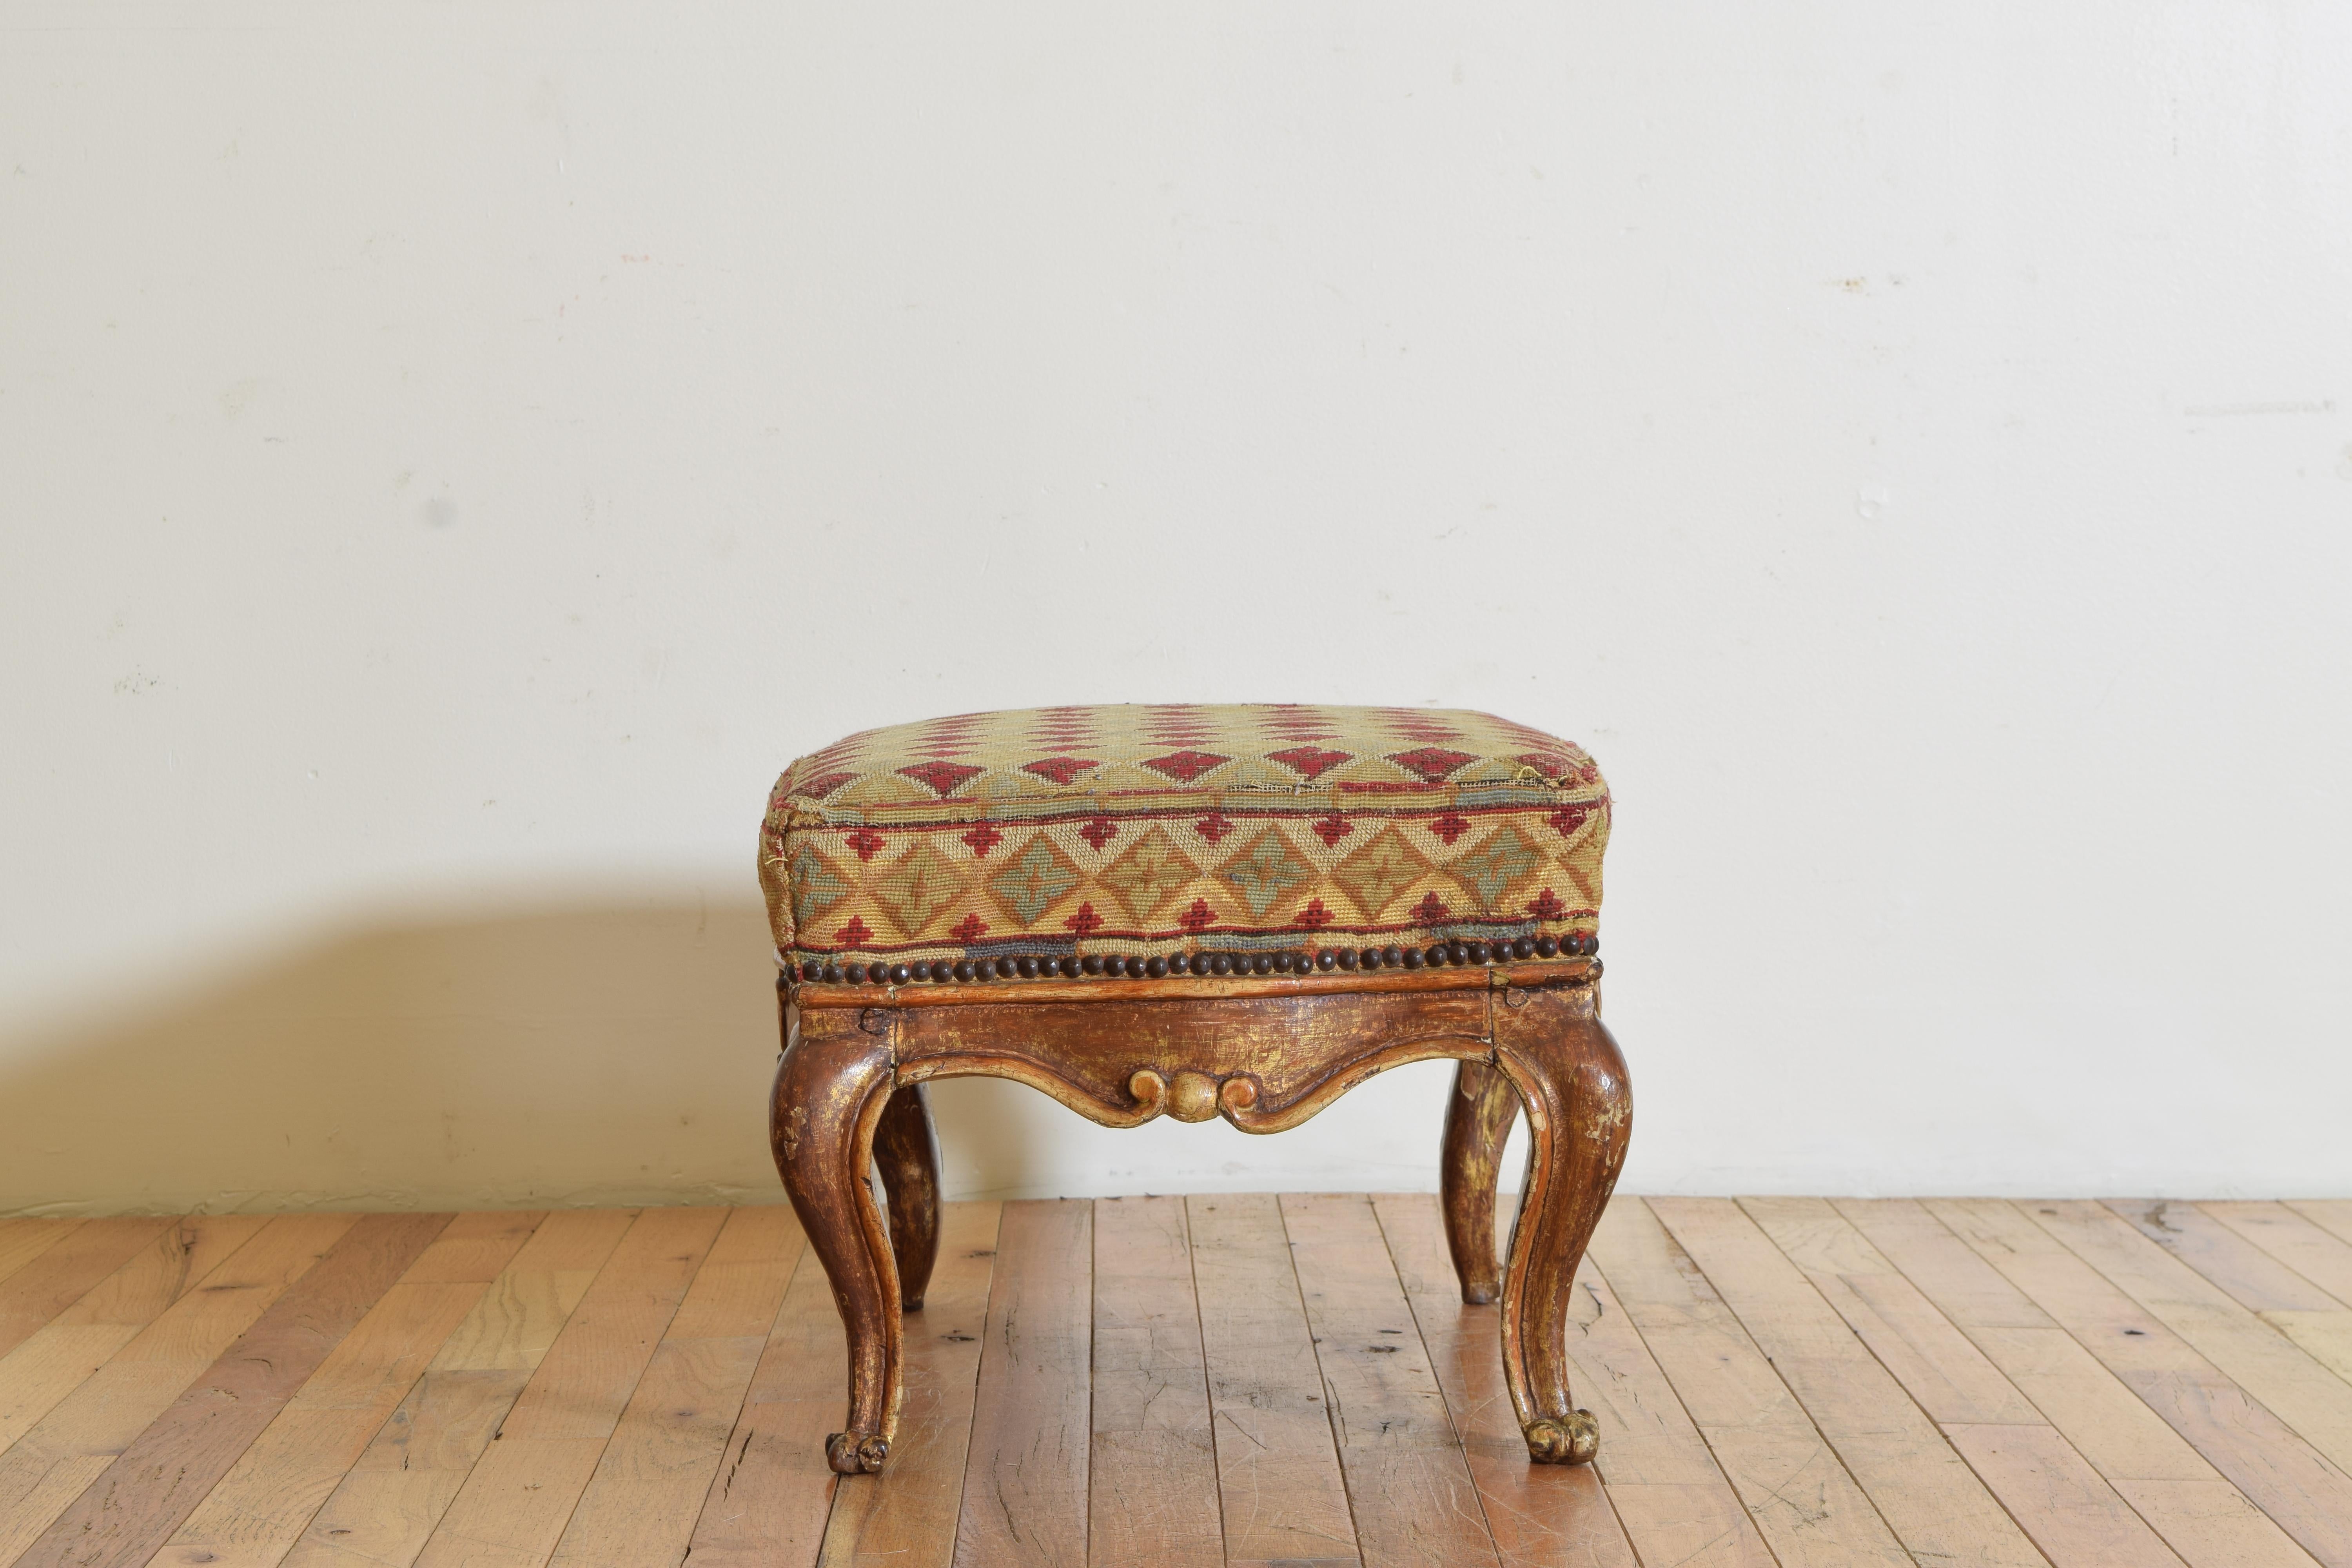 18th Century Italian, Piemontese, Rococo Period Lacquered and Gilded Footstool, Mid 18th Cen. For Sale